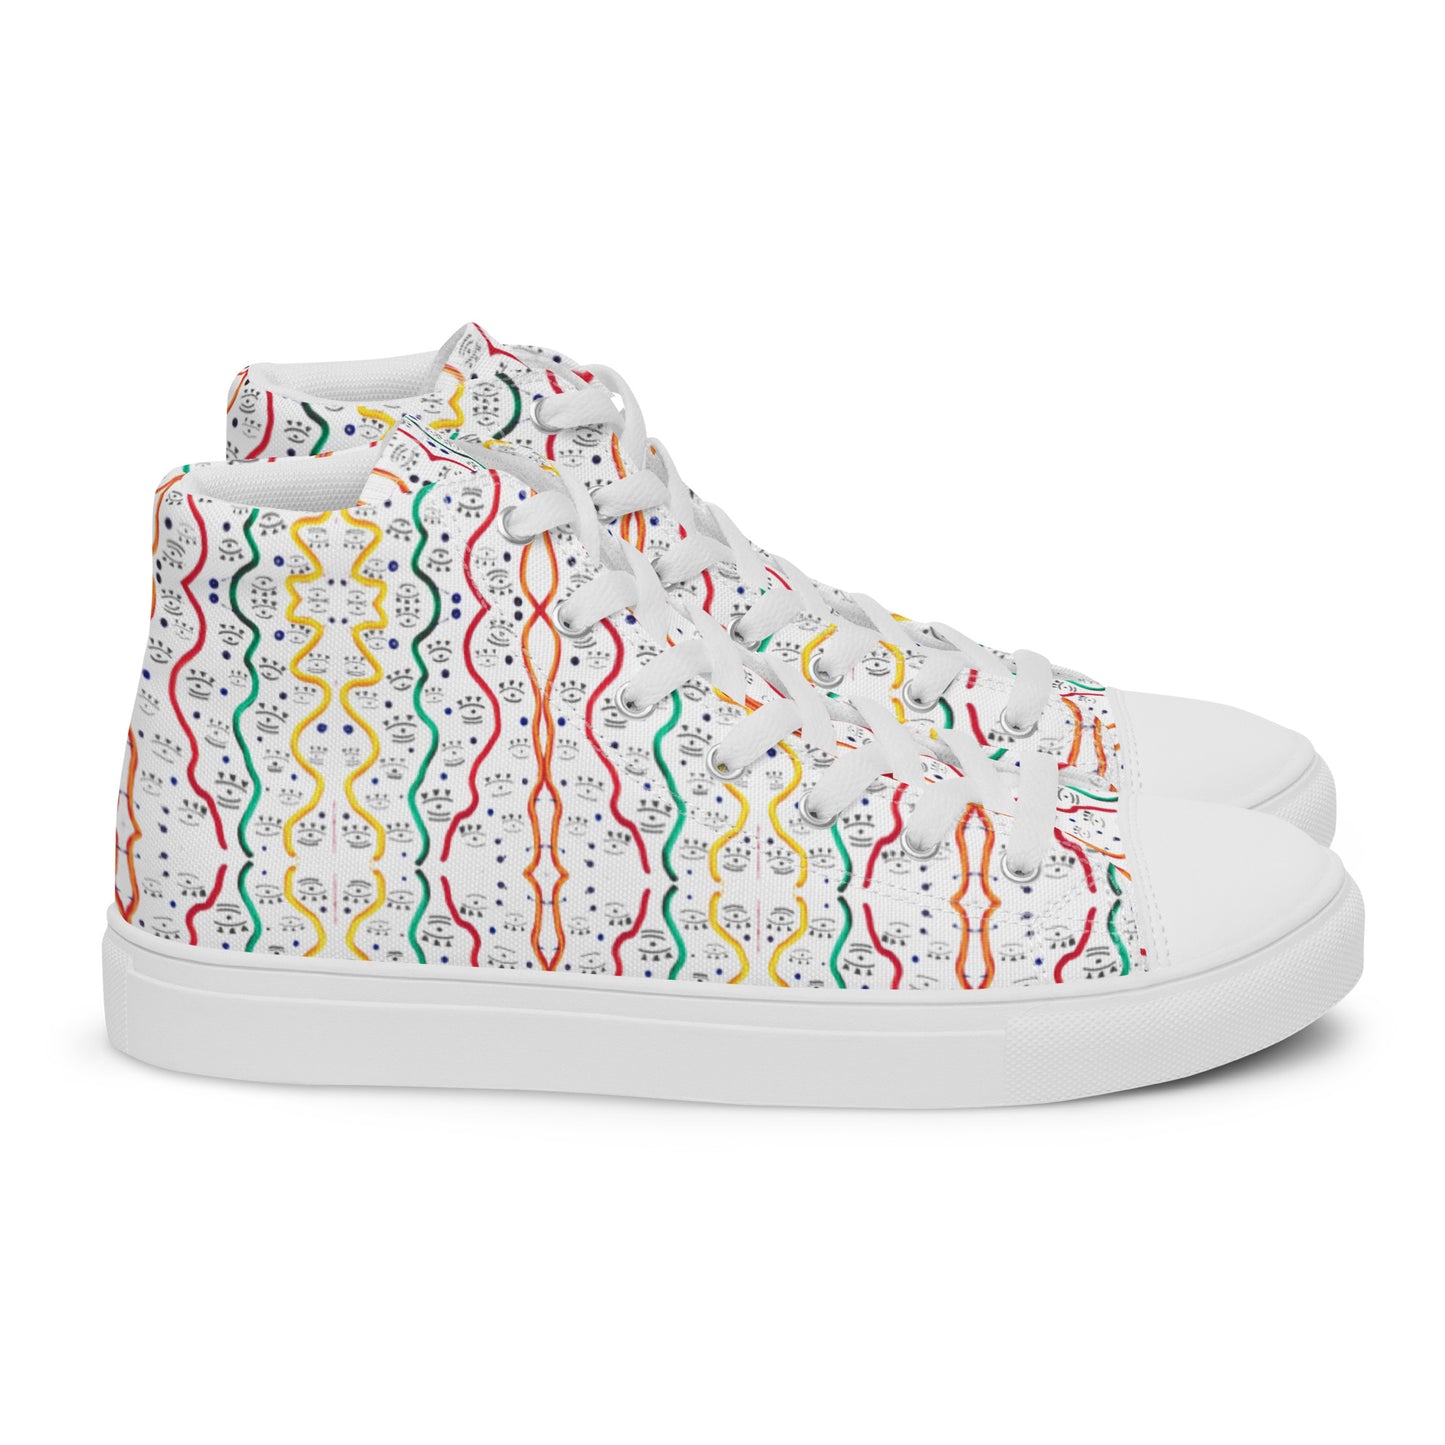 THE EYE - Women's high-top canvas trainers